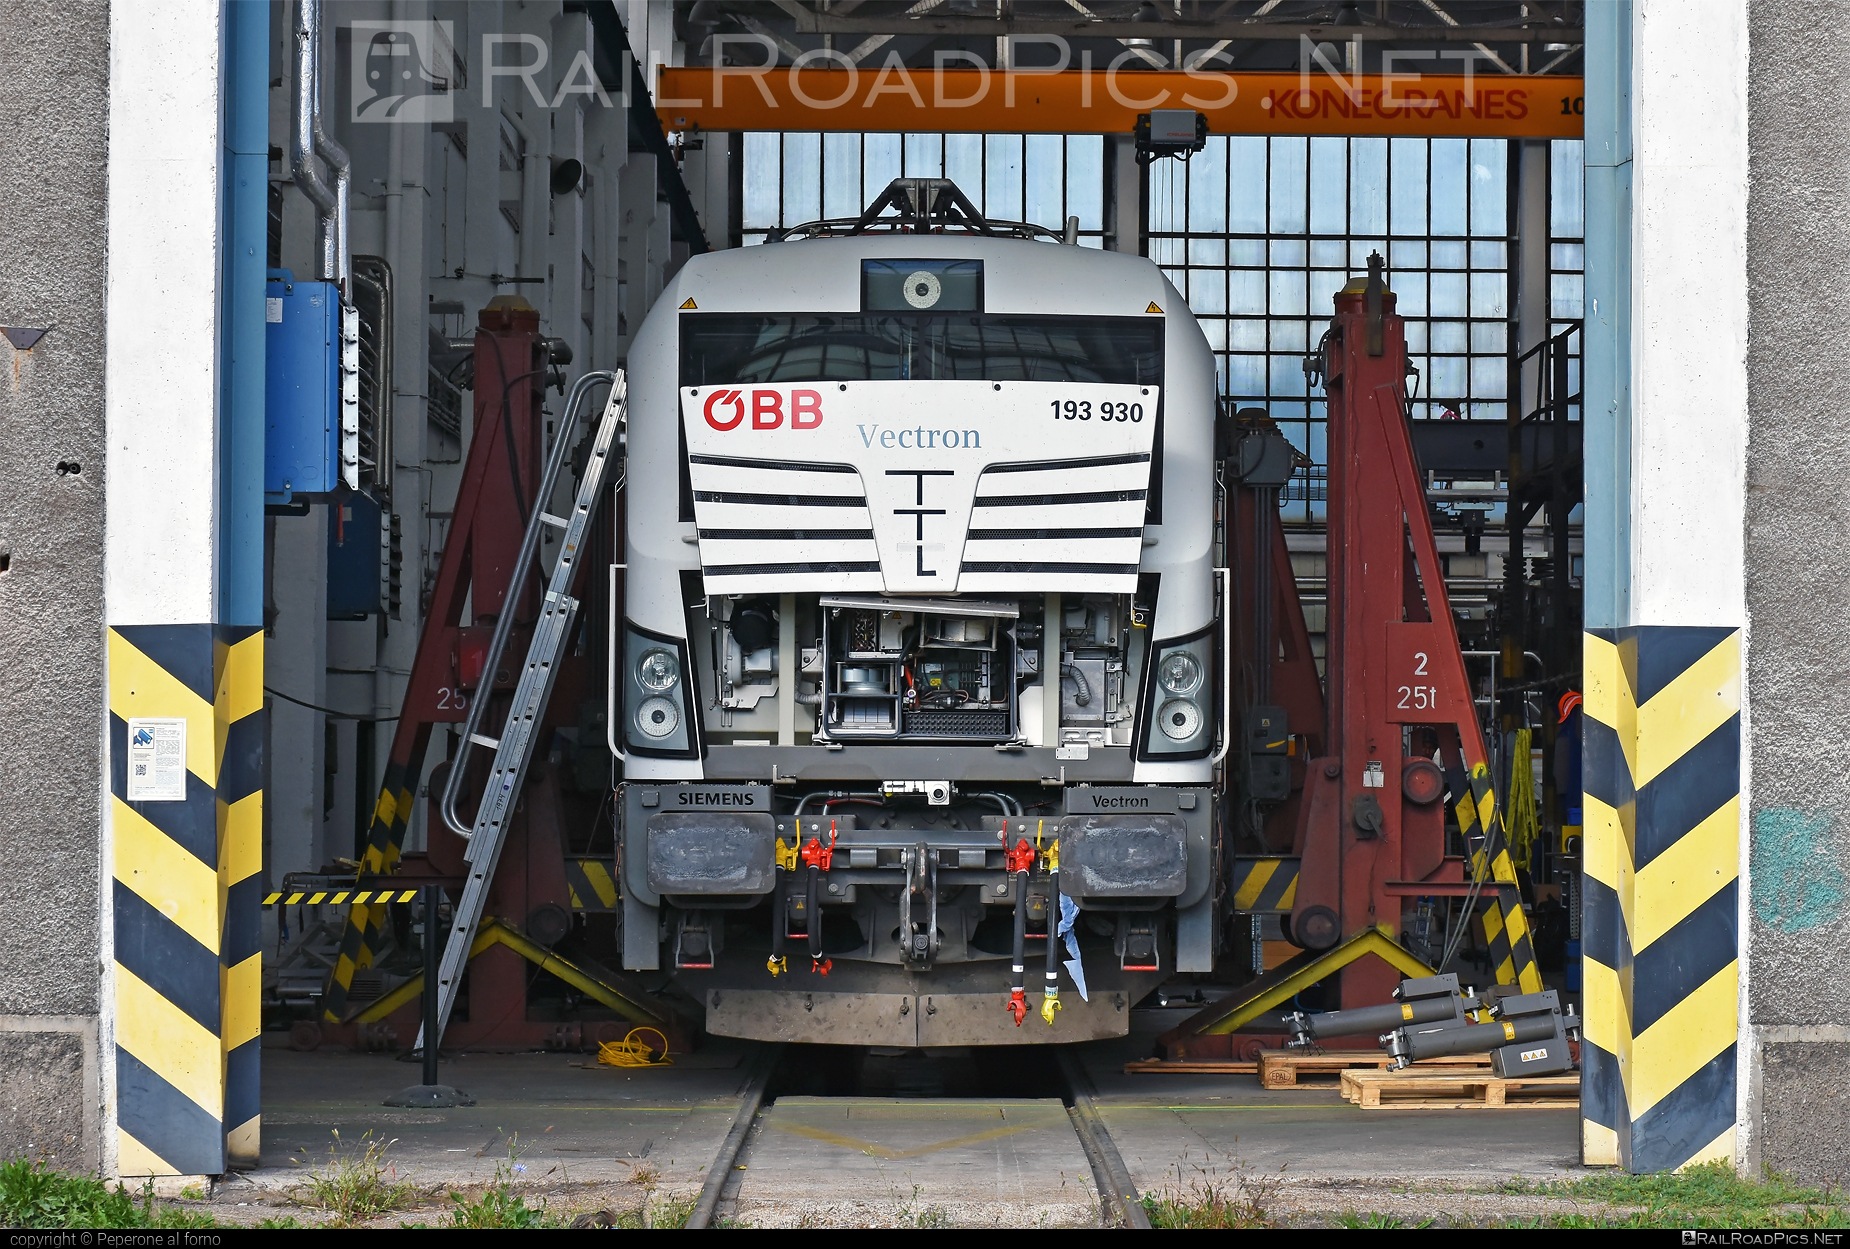 Siemens Vectron AC DPM - 193 930 operated by Siemens Mobility GmbH #SiemensMobility #SiemensMobilityGmbH #hangar #obb #siemens #siemensVectron #siemensVectronACDPM #vectron #vectronACDPM